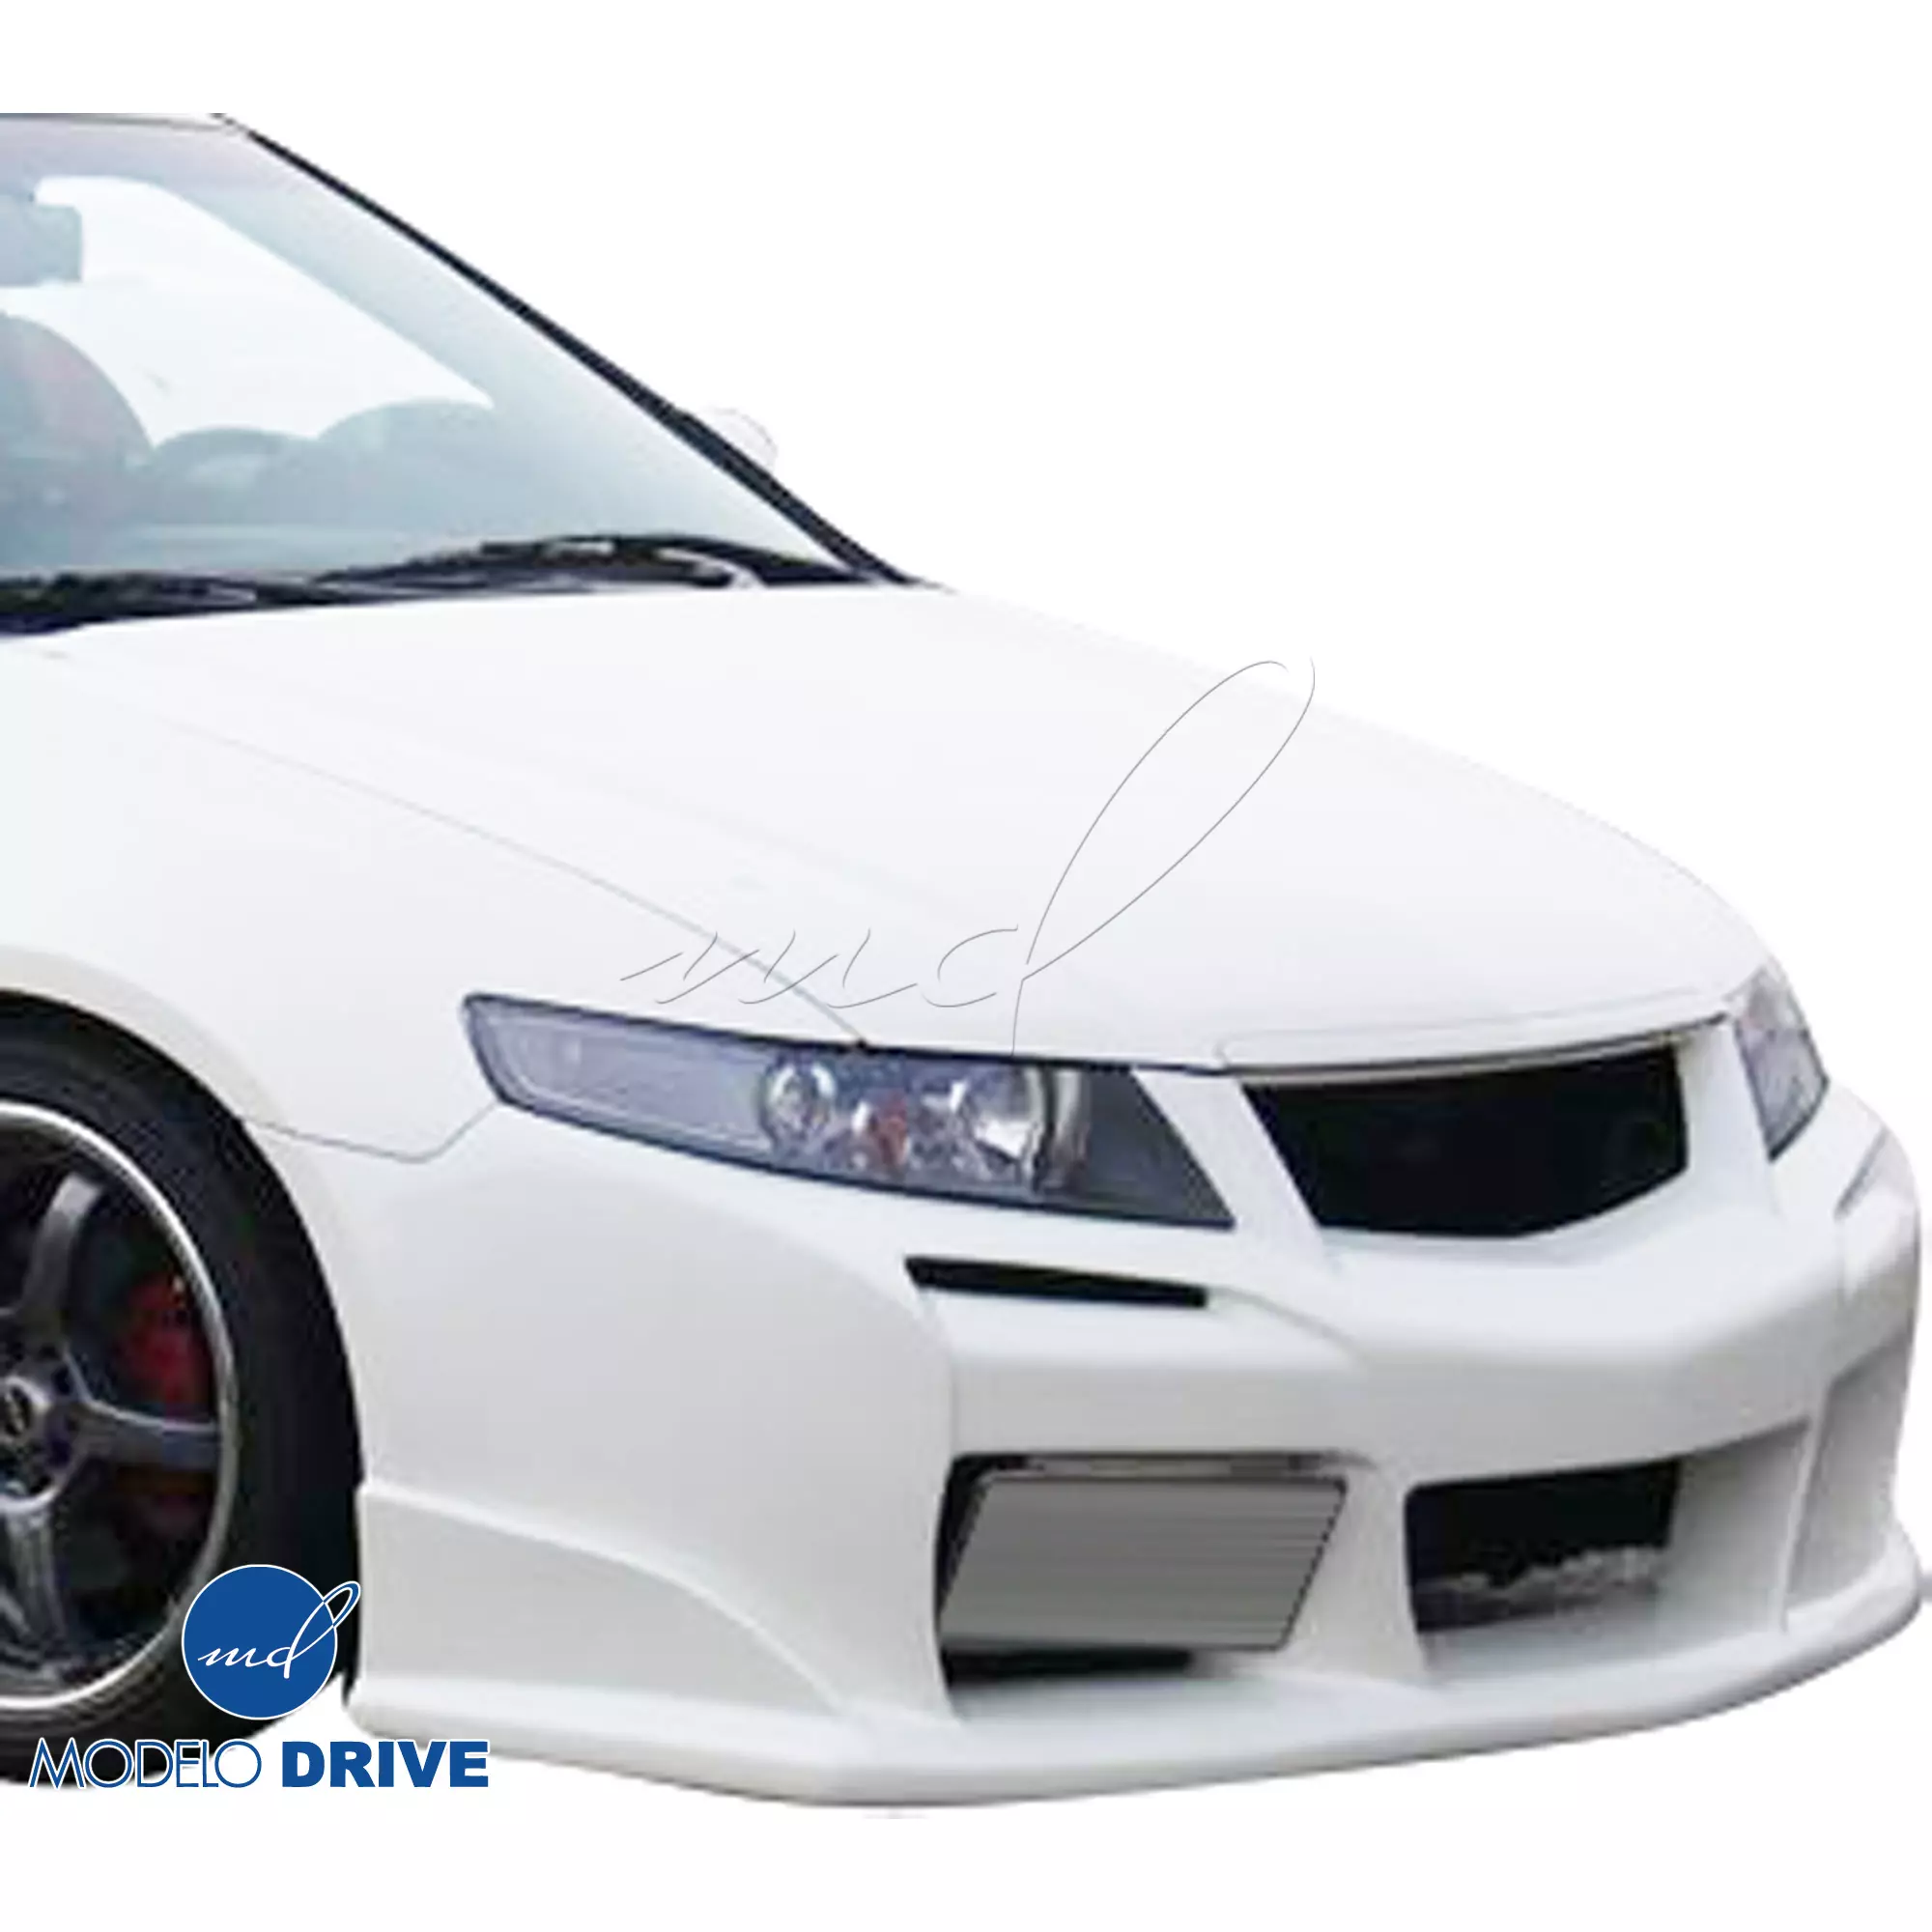 ModeloDrive FRP LSTA Front Bumper > Acura TSX CL9 2004-2008 - Image 10